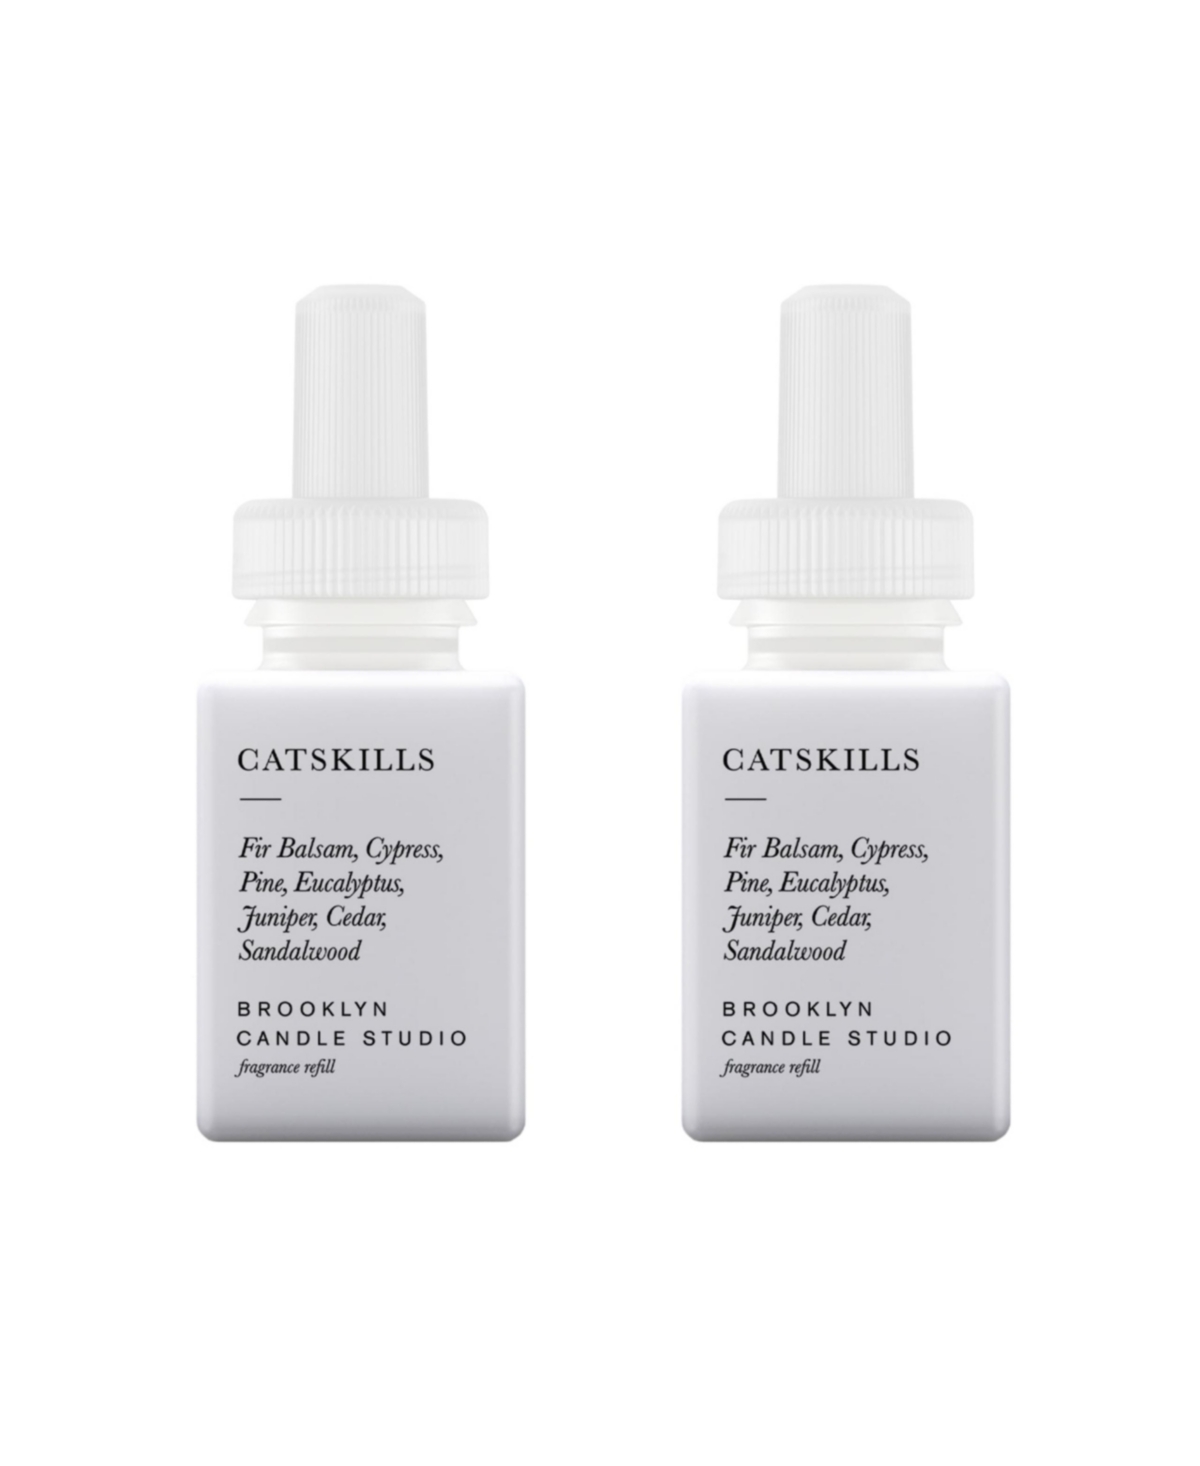 Brooklyn Candle Studio - Catskills - Home Scent Refill - Smart Home Air Diffuser Fragrance - Up to 120-Hours of Luxury Fragrance per Vial - Clean